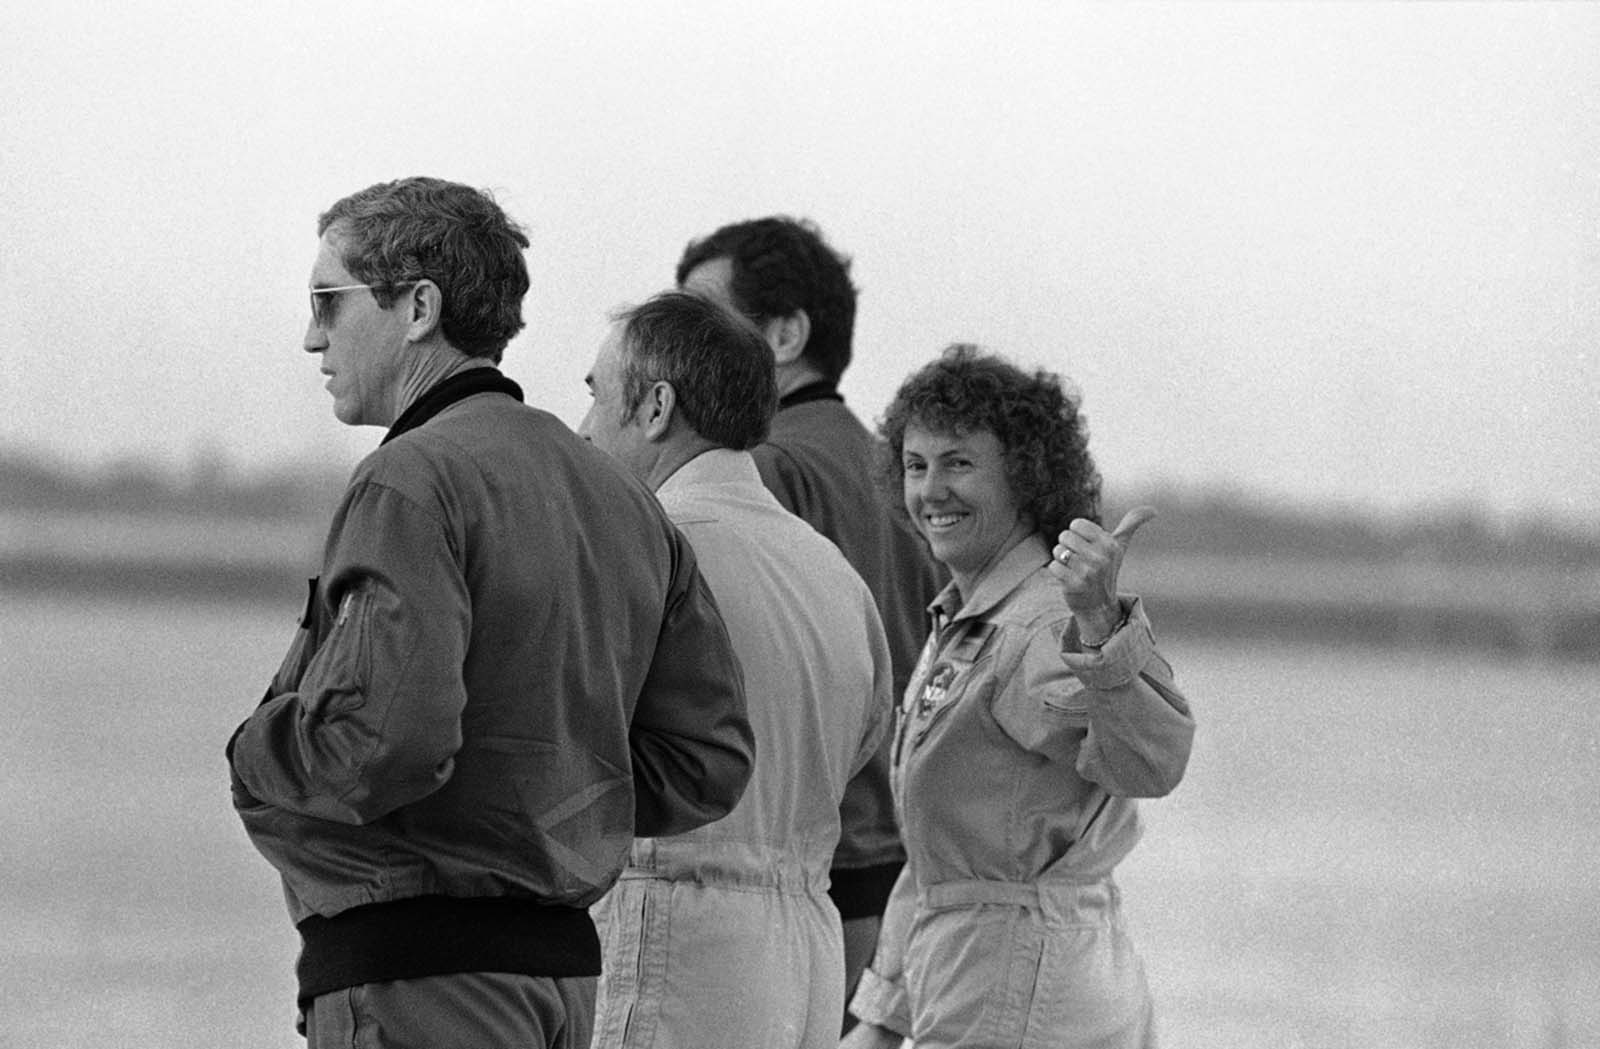 challenger disaster pictures